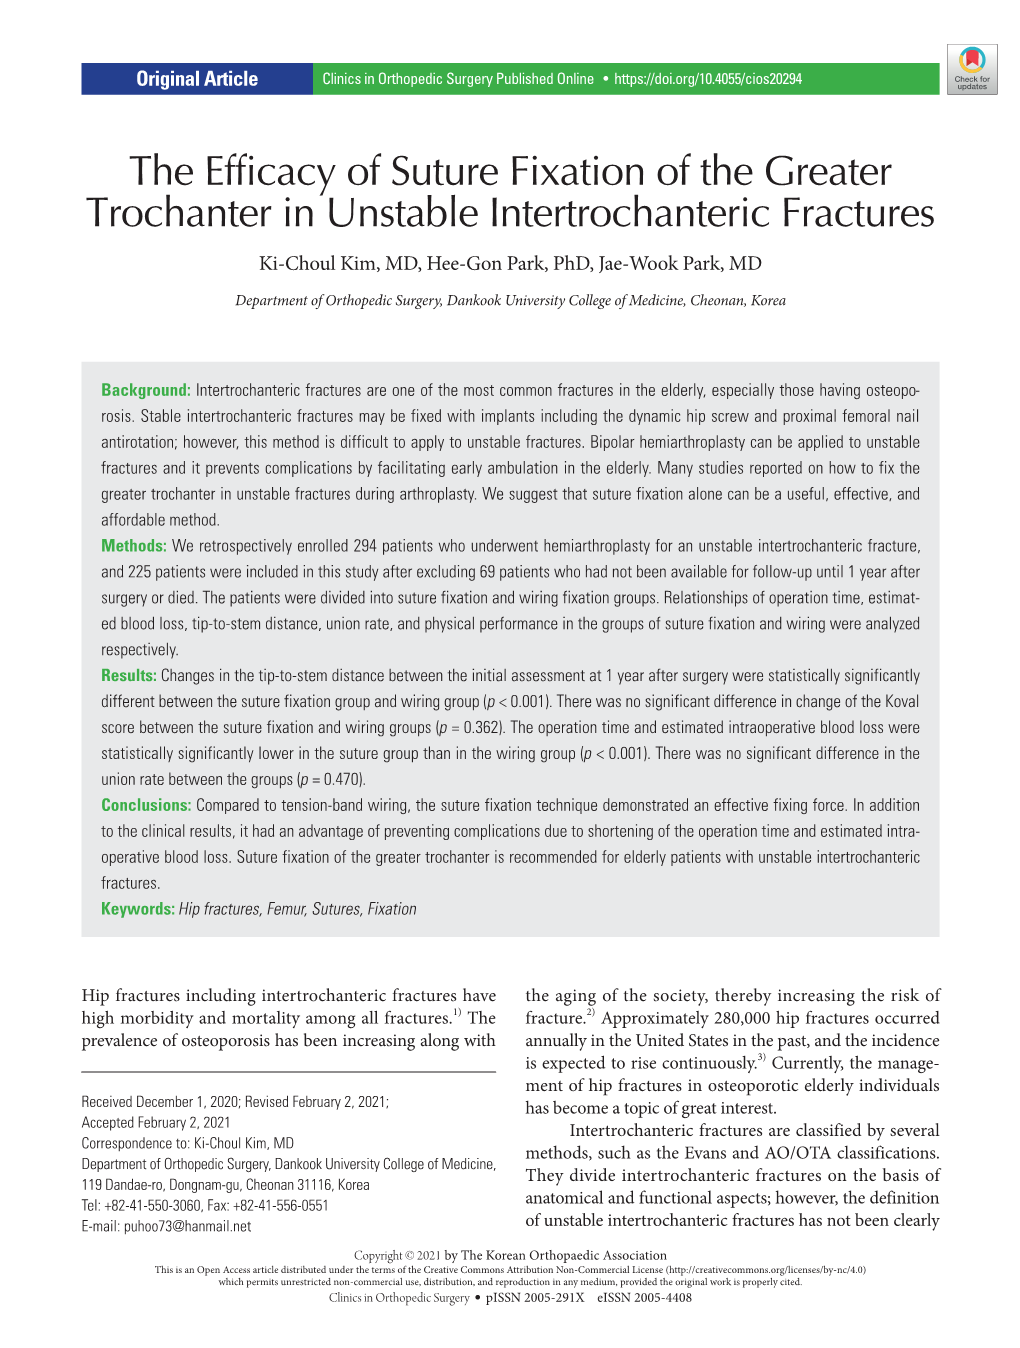 The Efficacy of Suture Fixation of the Greater Trochanter in Unstable Intertrochanteric Fractures Ki-Choul Kim, MD, Hee-Gon Park, Phd, Jae-Wook Park, MD